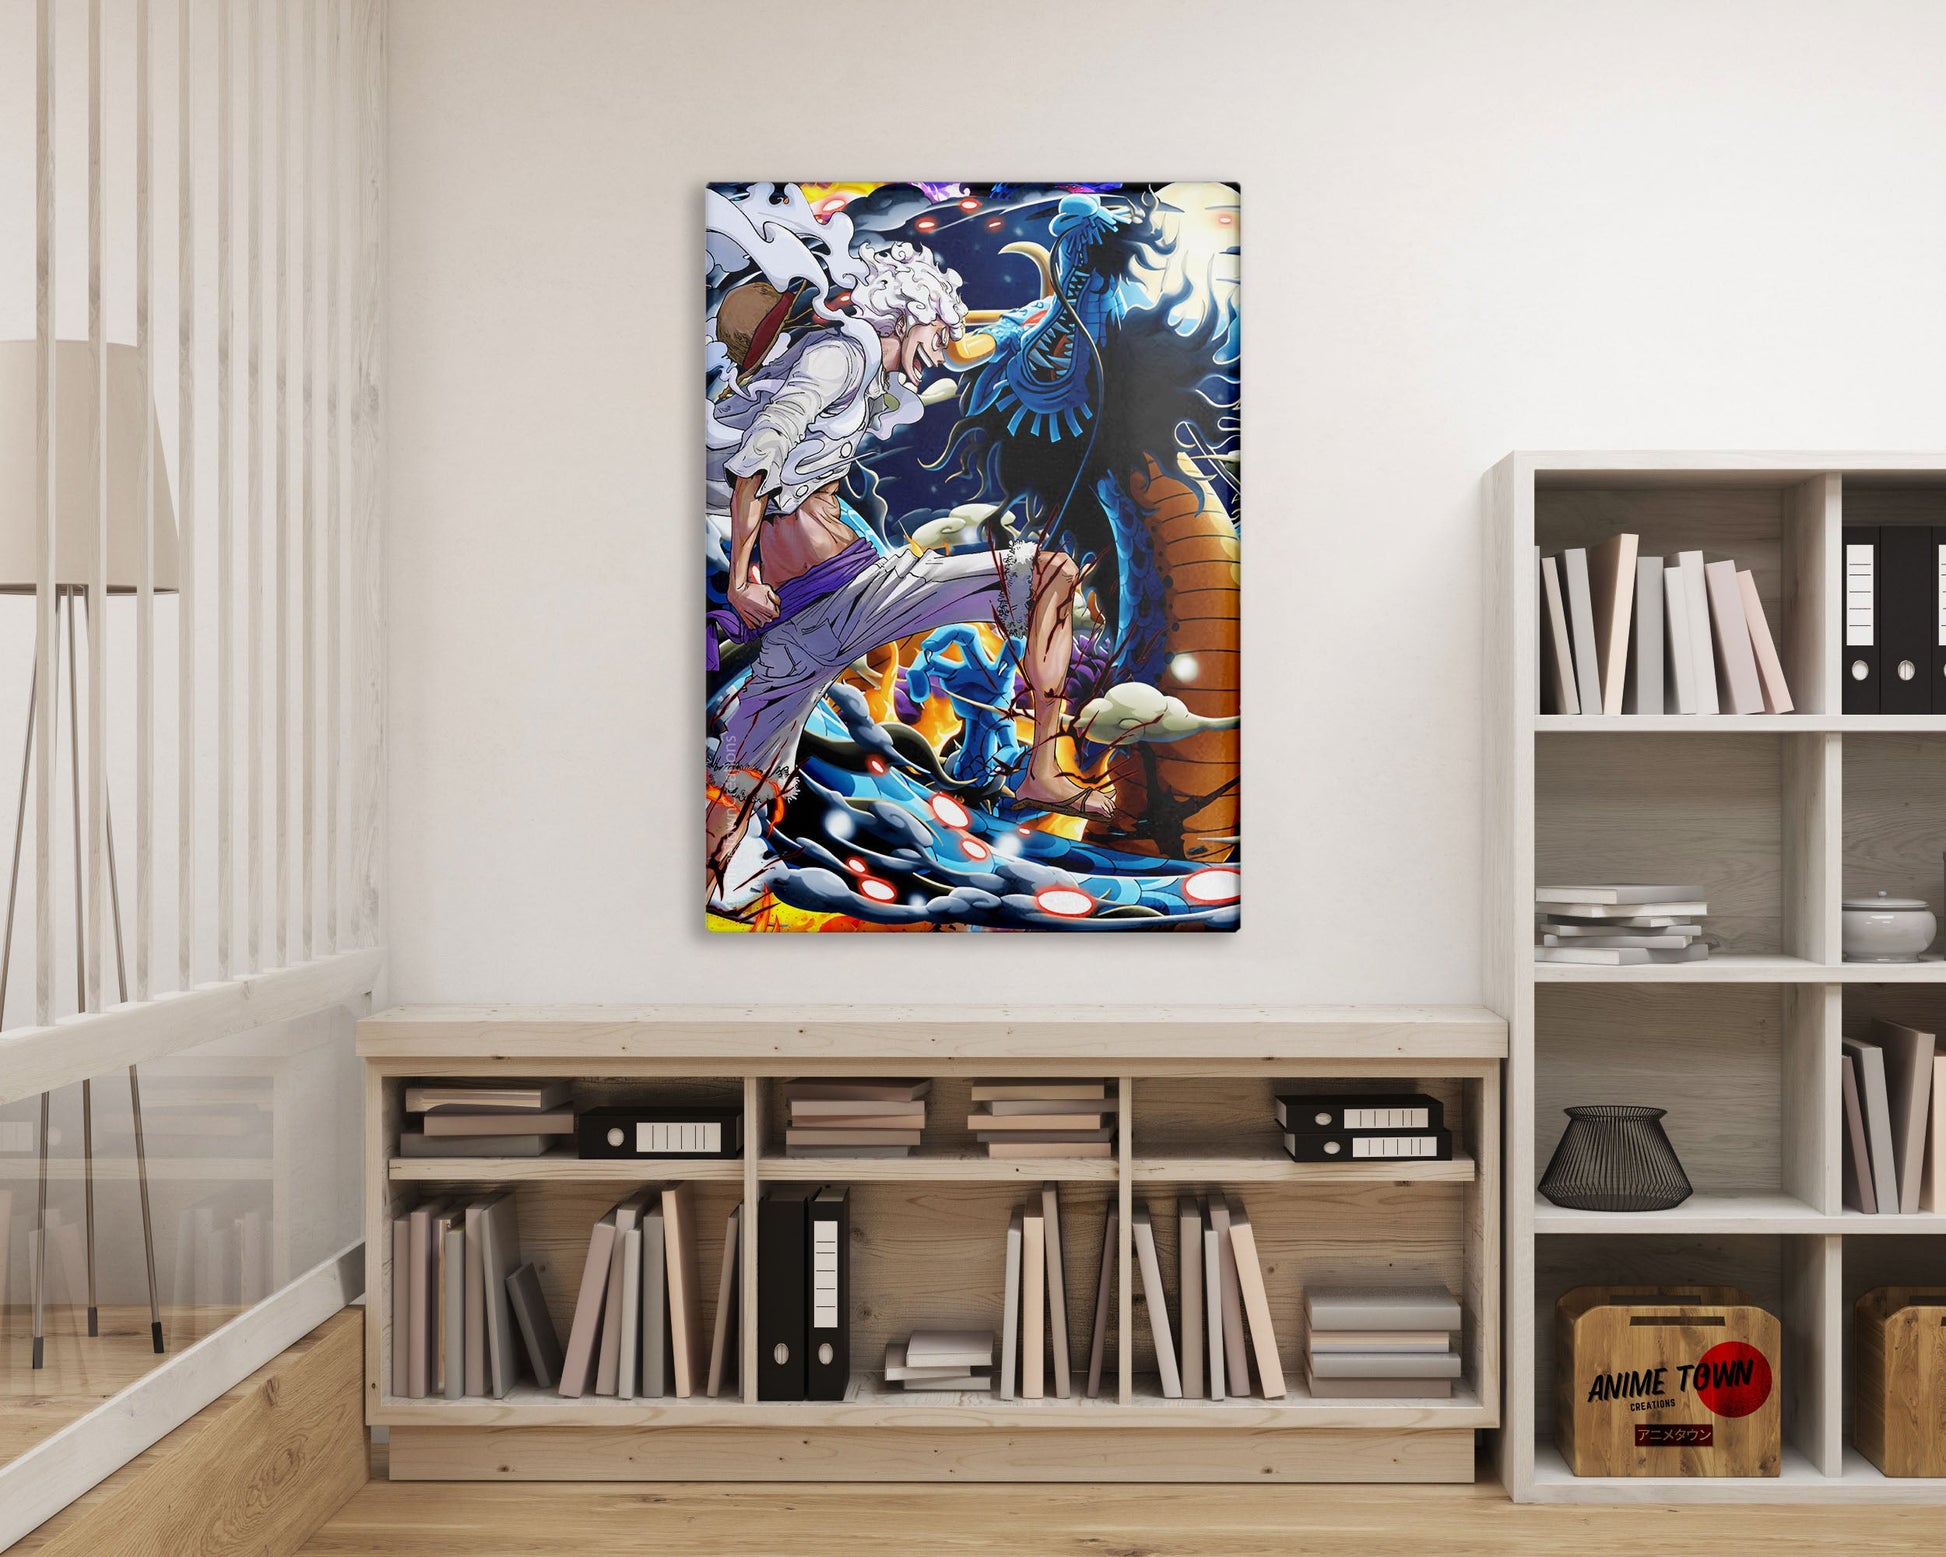 Anime Town Creations Metal Poster One Piece Luffy Gear 5 vs Kaido 16" x 24" Home Goods - Anime One Piece Metal Poster